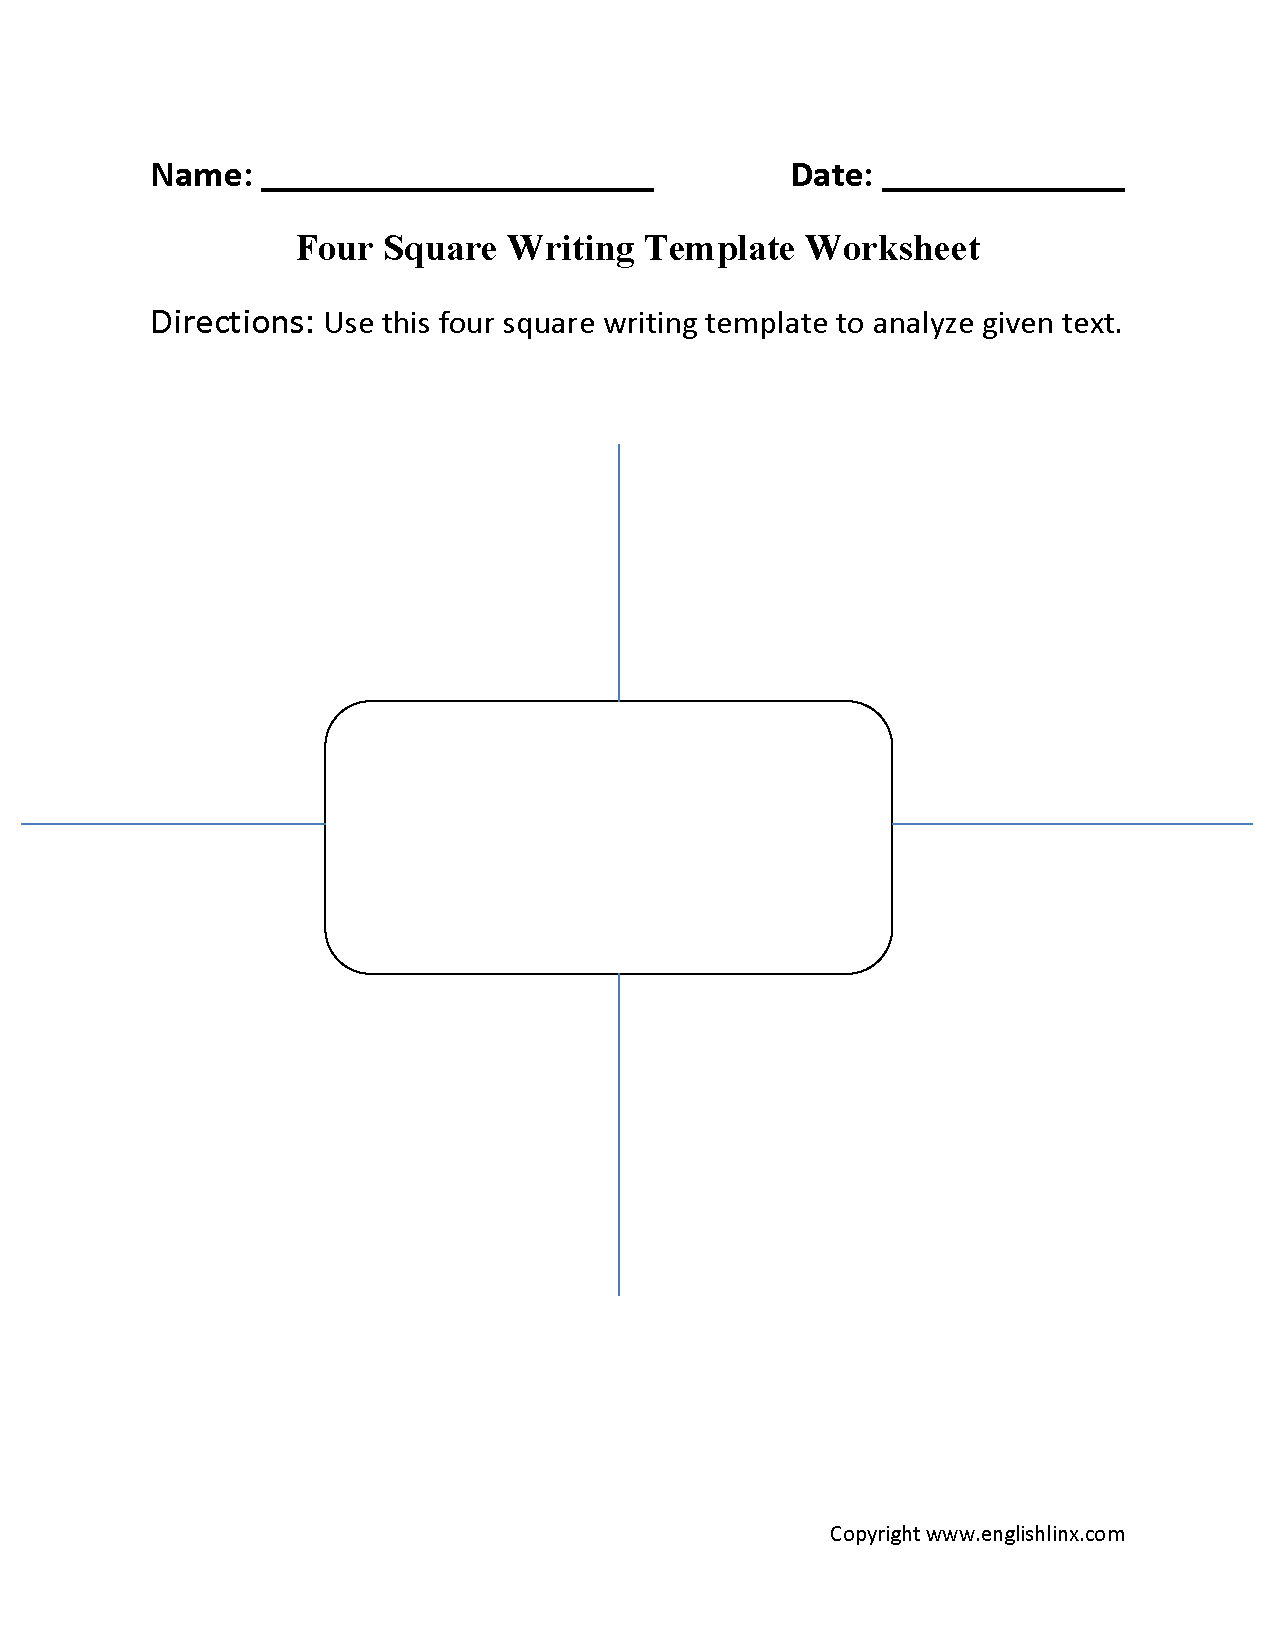 Writing Worksheets | Writing Template Worksheets For Blank Four Square Writing Template